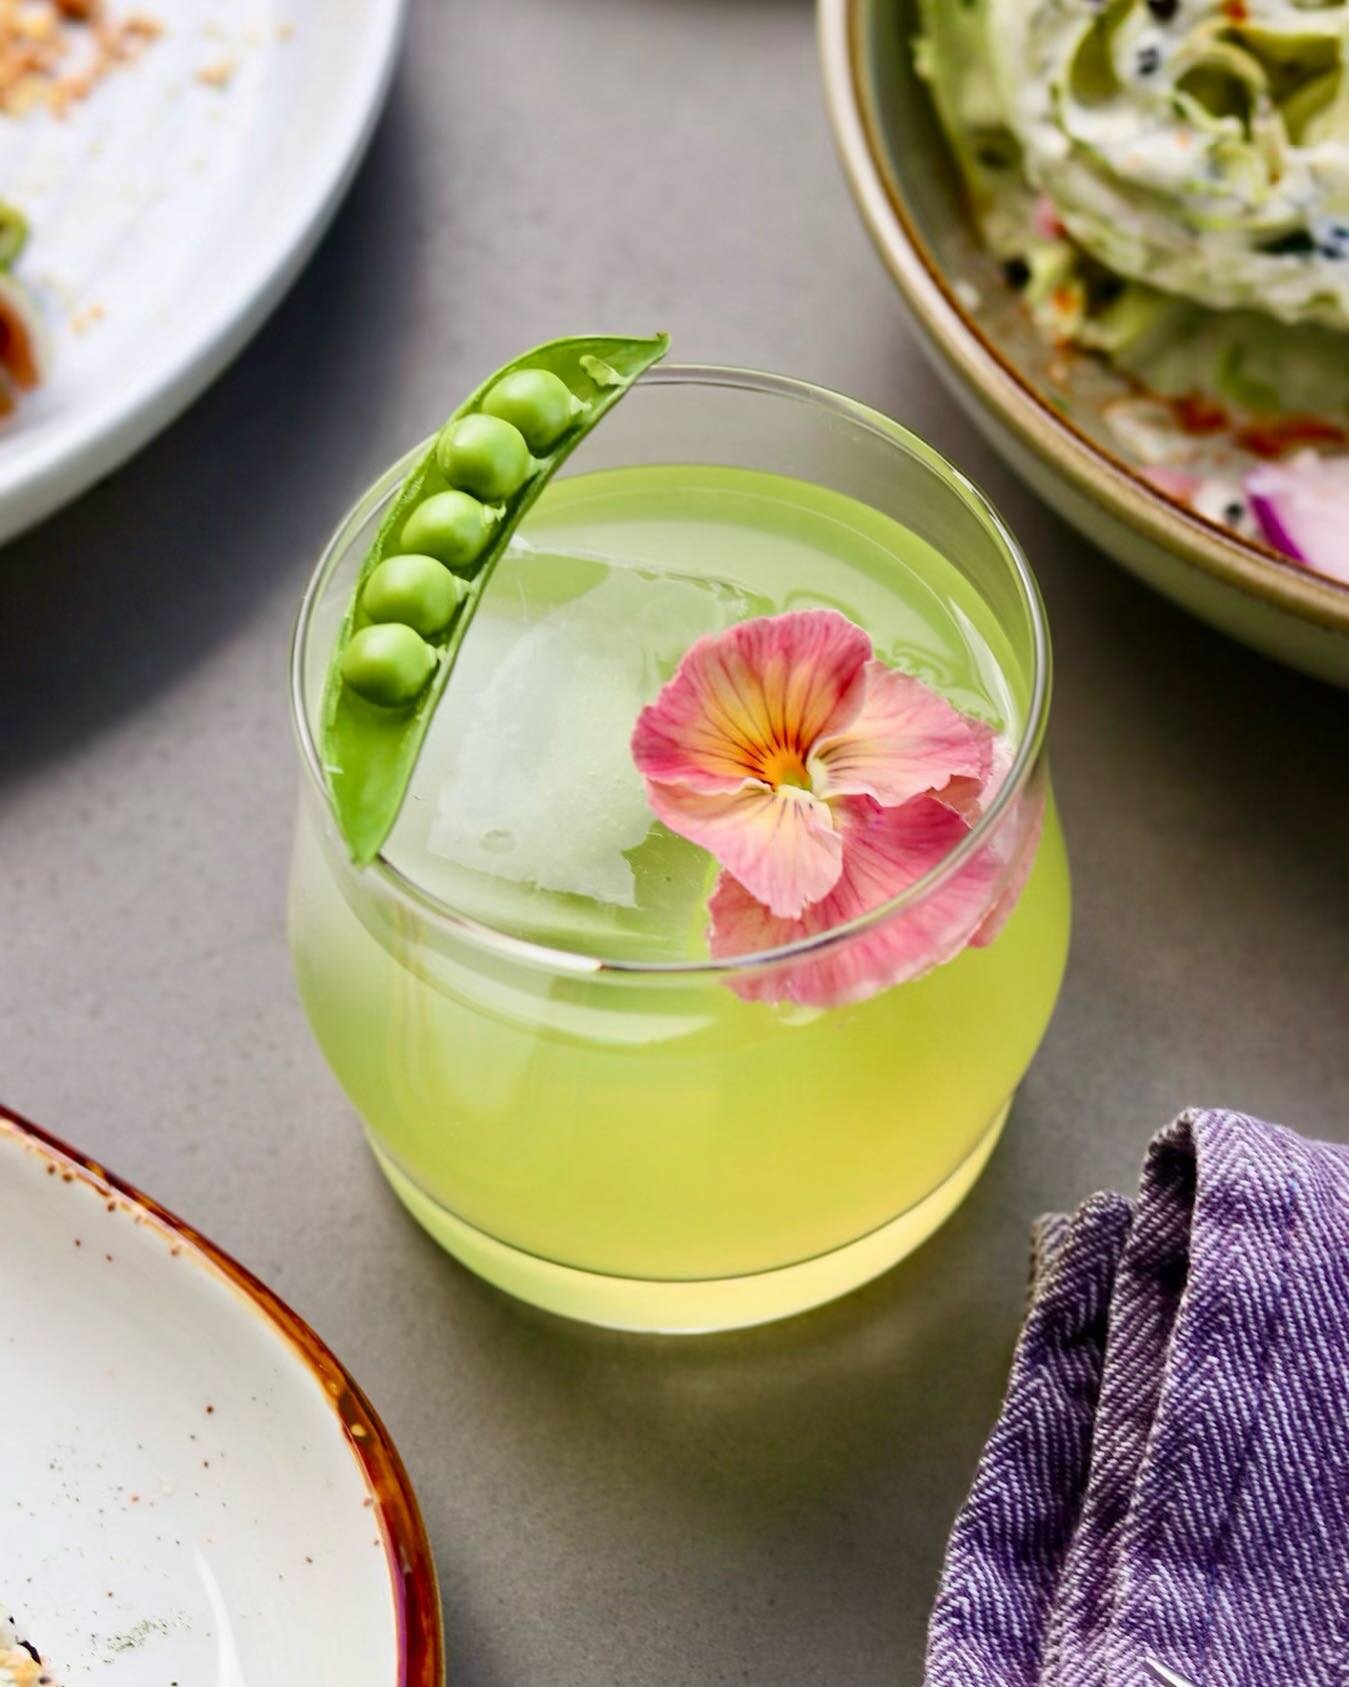 SWEET PEA 🌸

&ndash;Aquavit, Sweet Pea Simple, Aveze, Celery Bitters, Freshly-Squeezed Lime&ndash;

What is Aquavit? Aquavit is a Scandinavian spirit that is typically made from grain or potatoes and flavored with a variety of herbs and spices, most